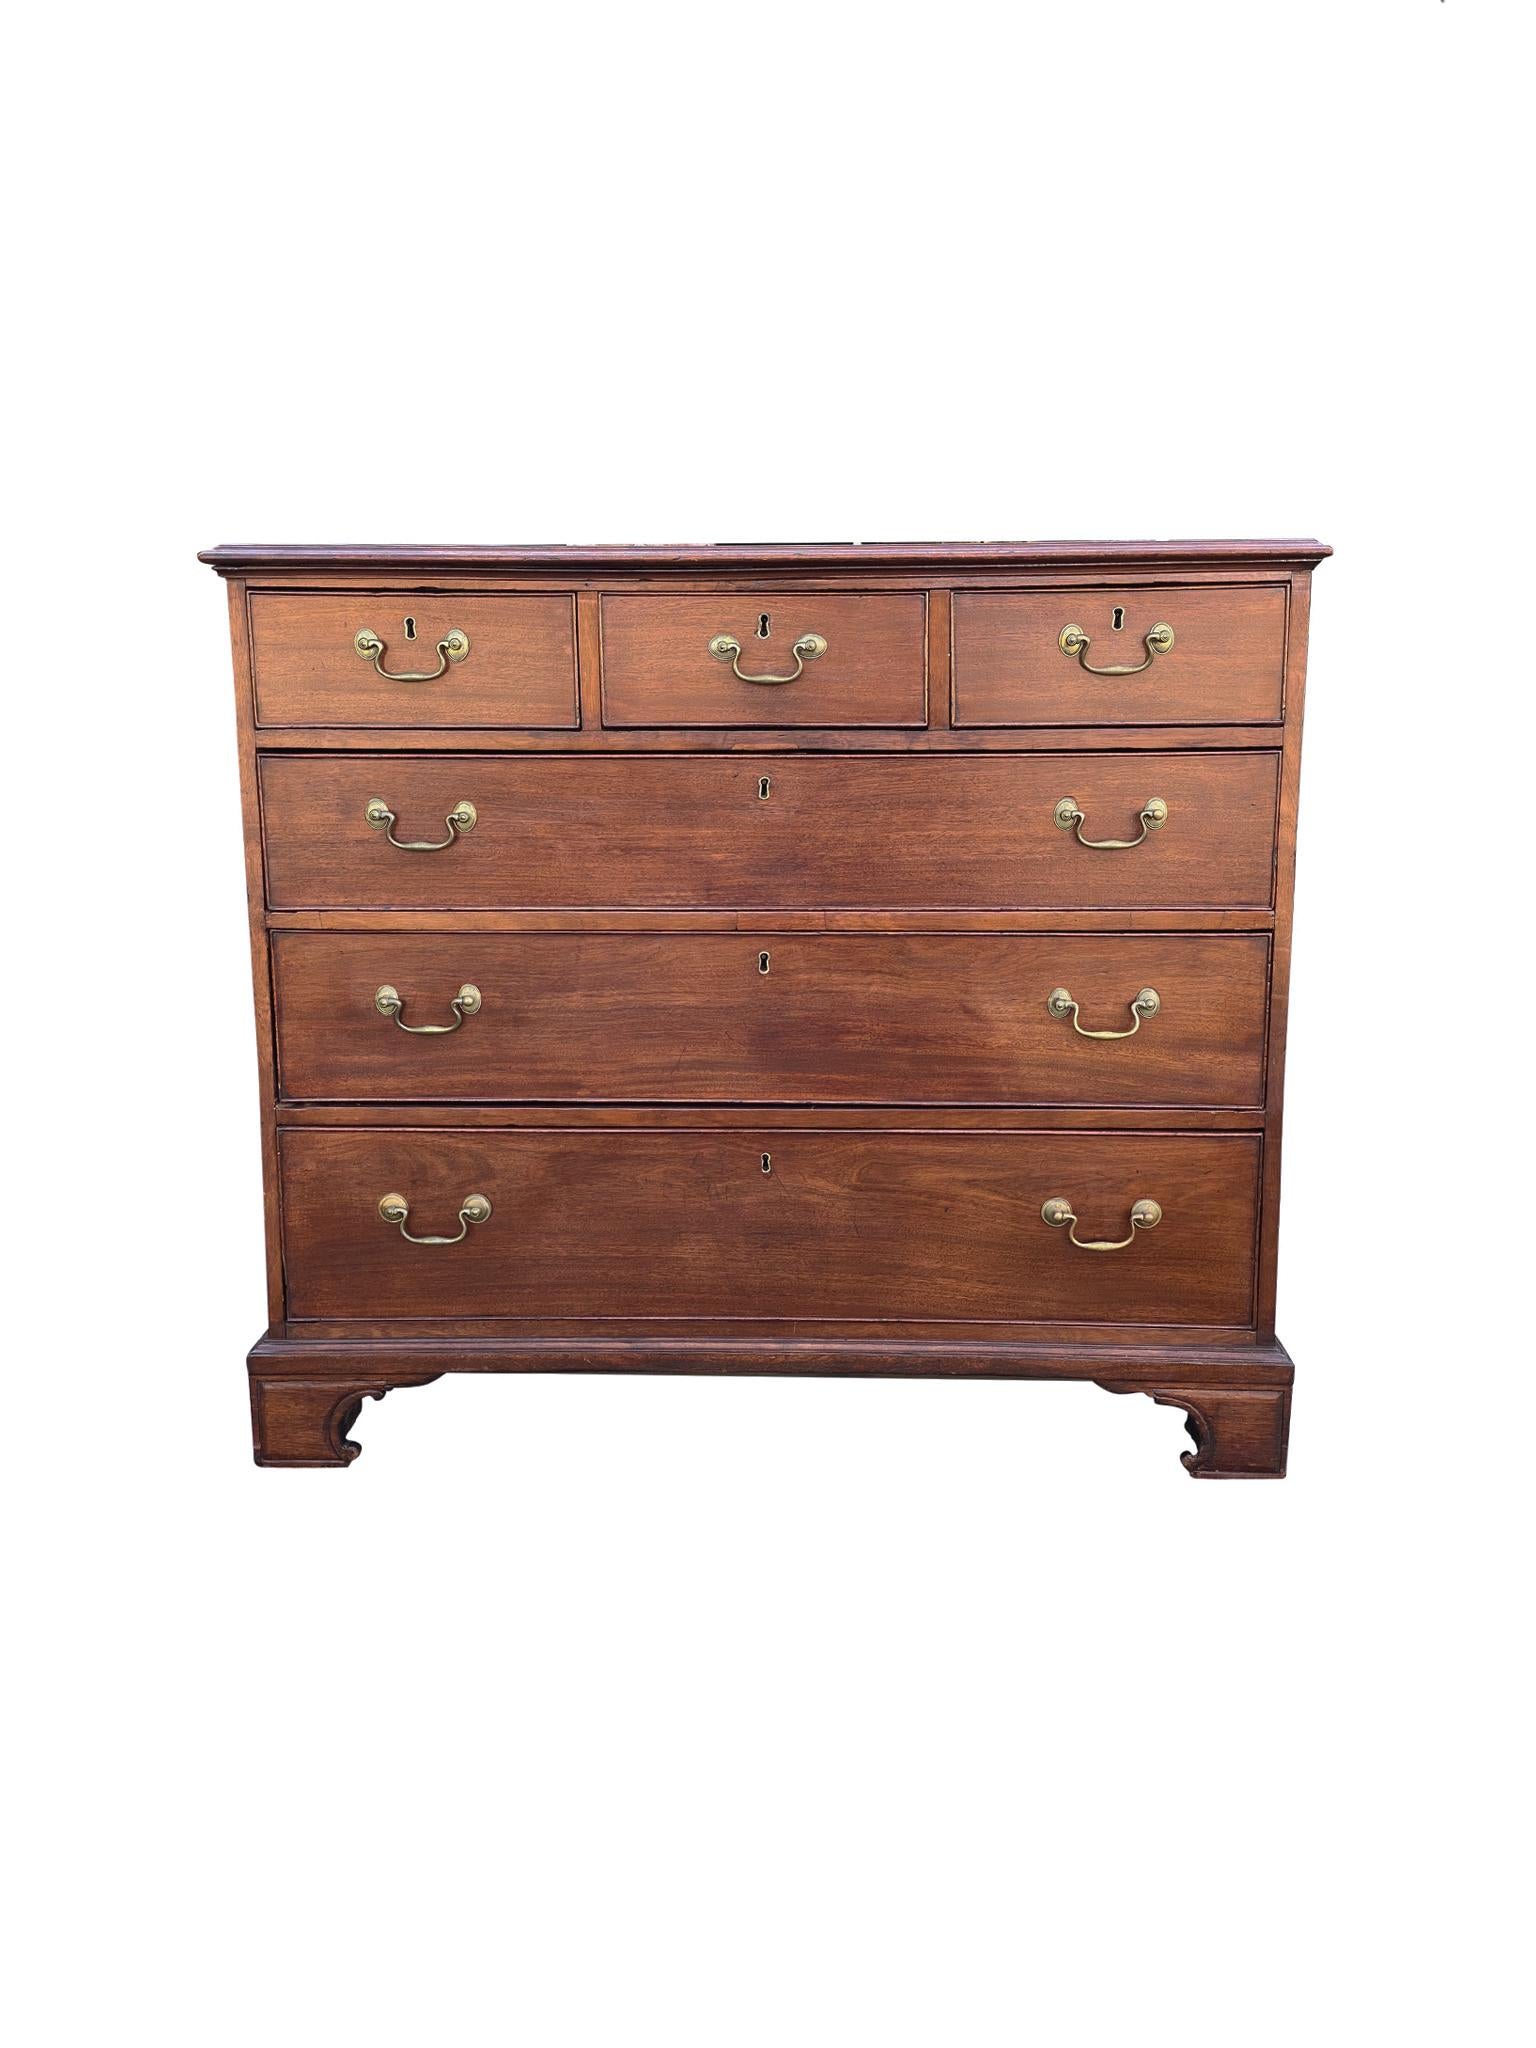 Classic and elegant, this George III chest of drawers was handcrafted circa 1800. It is made from walnut, recently refinished with a warm red-brown tone. The bail pulls are brass. We love the simplicity of this design. It's one of balance and